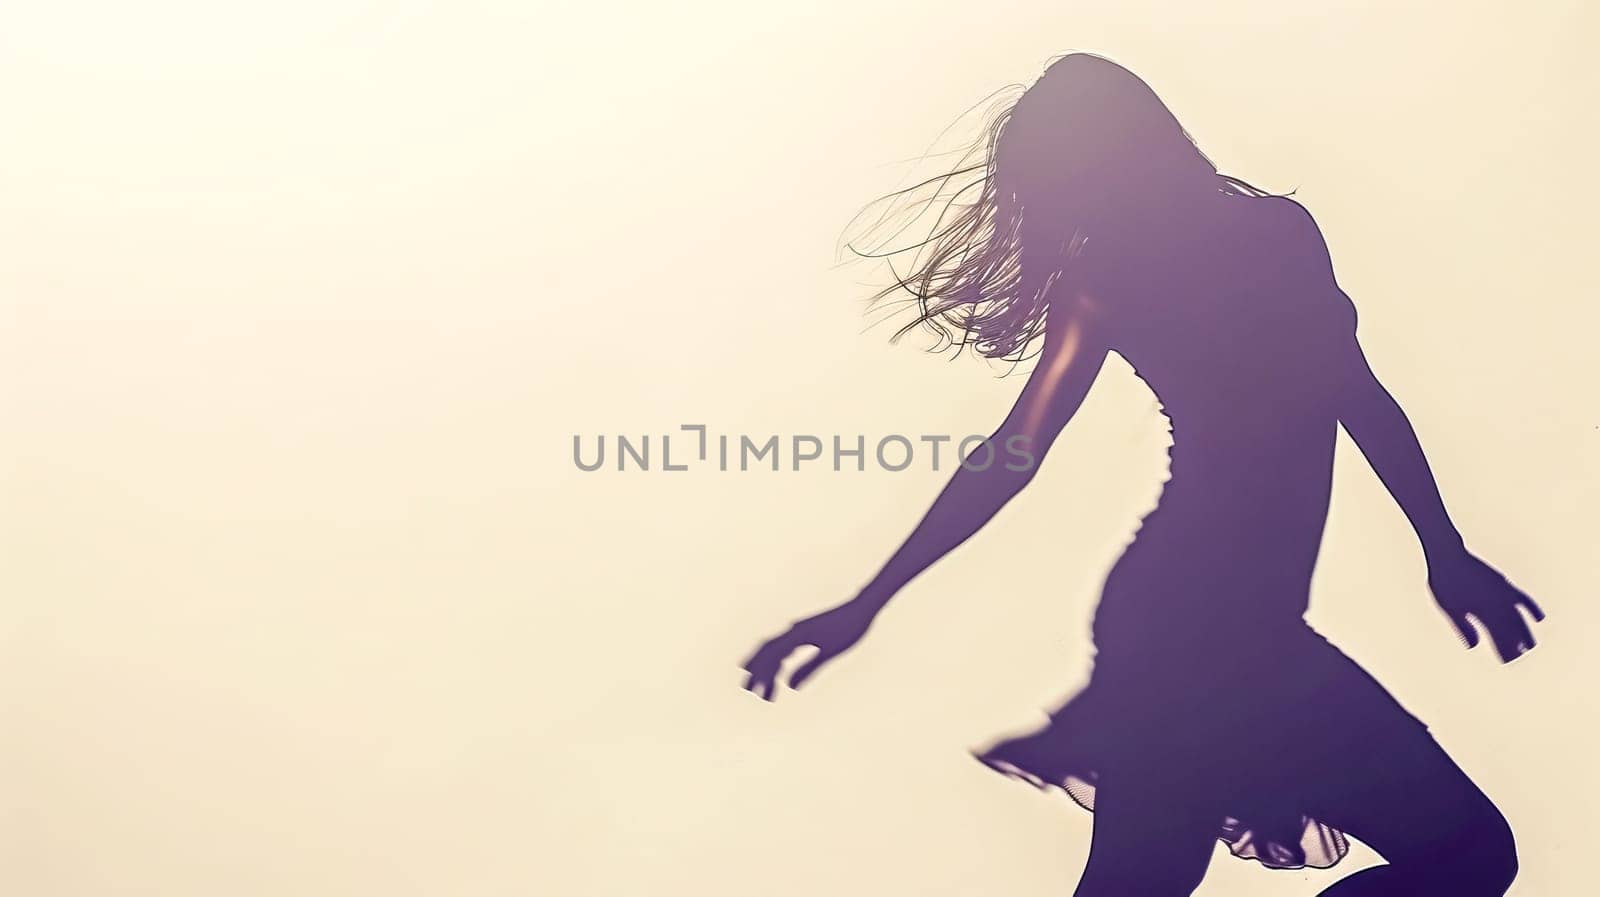 Backlit silhouette image capturing the carefree dance of a woman against a soft sunset glow